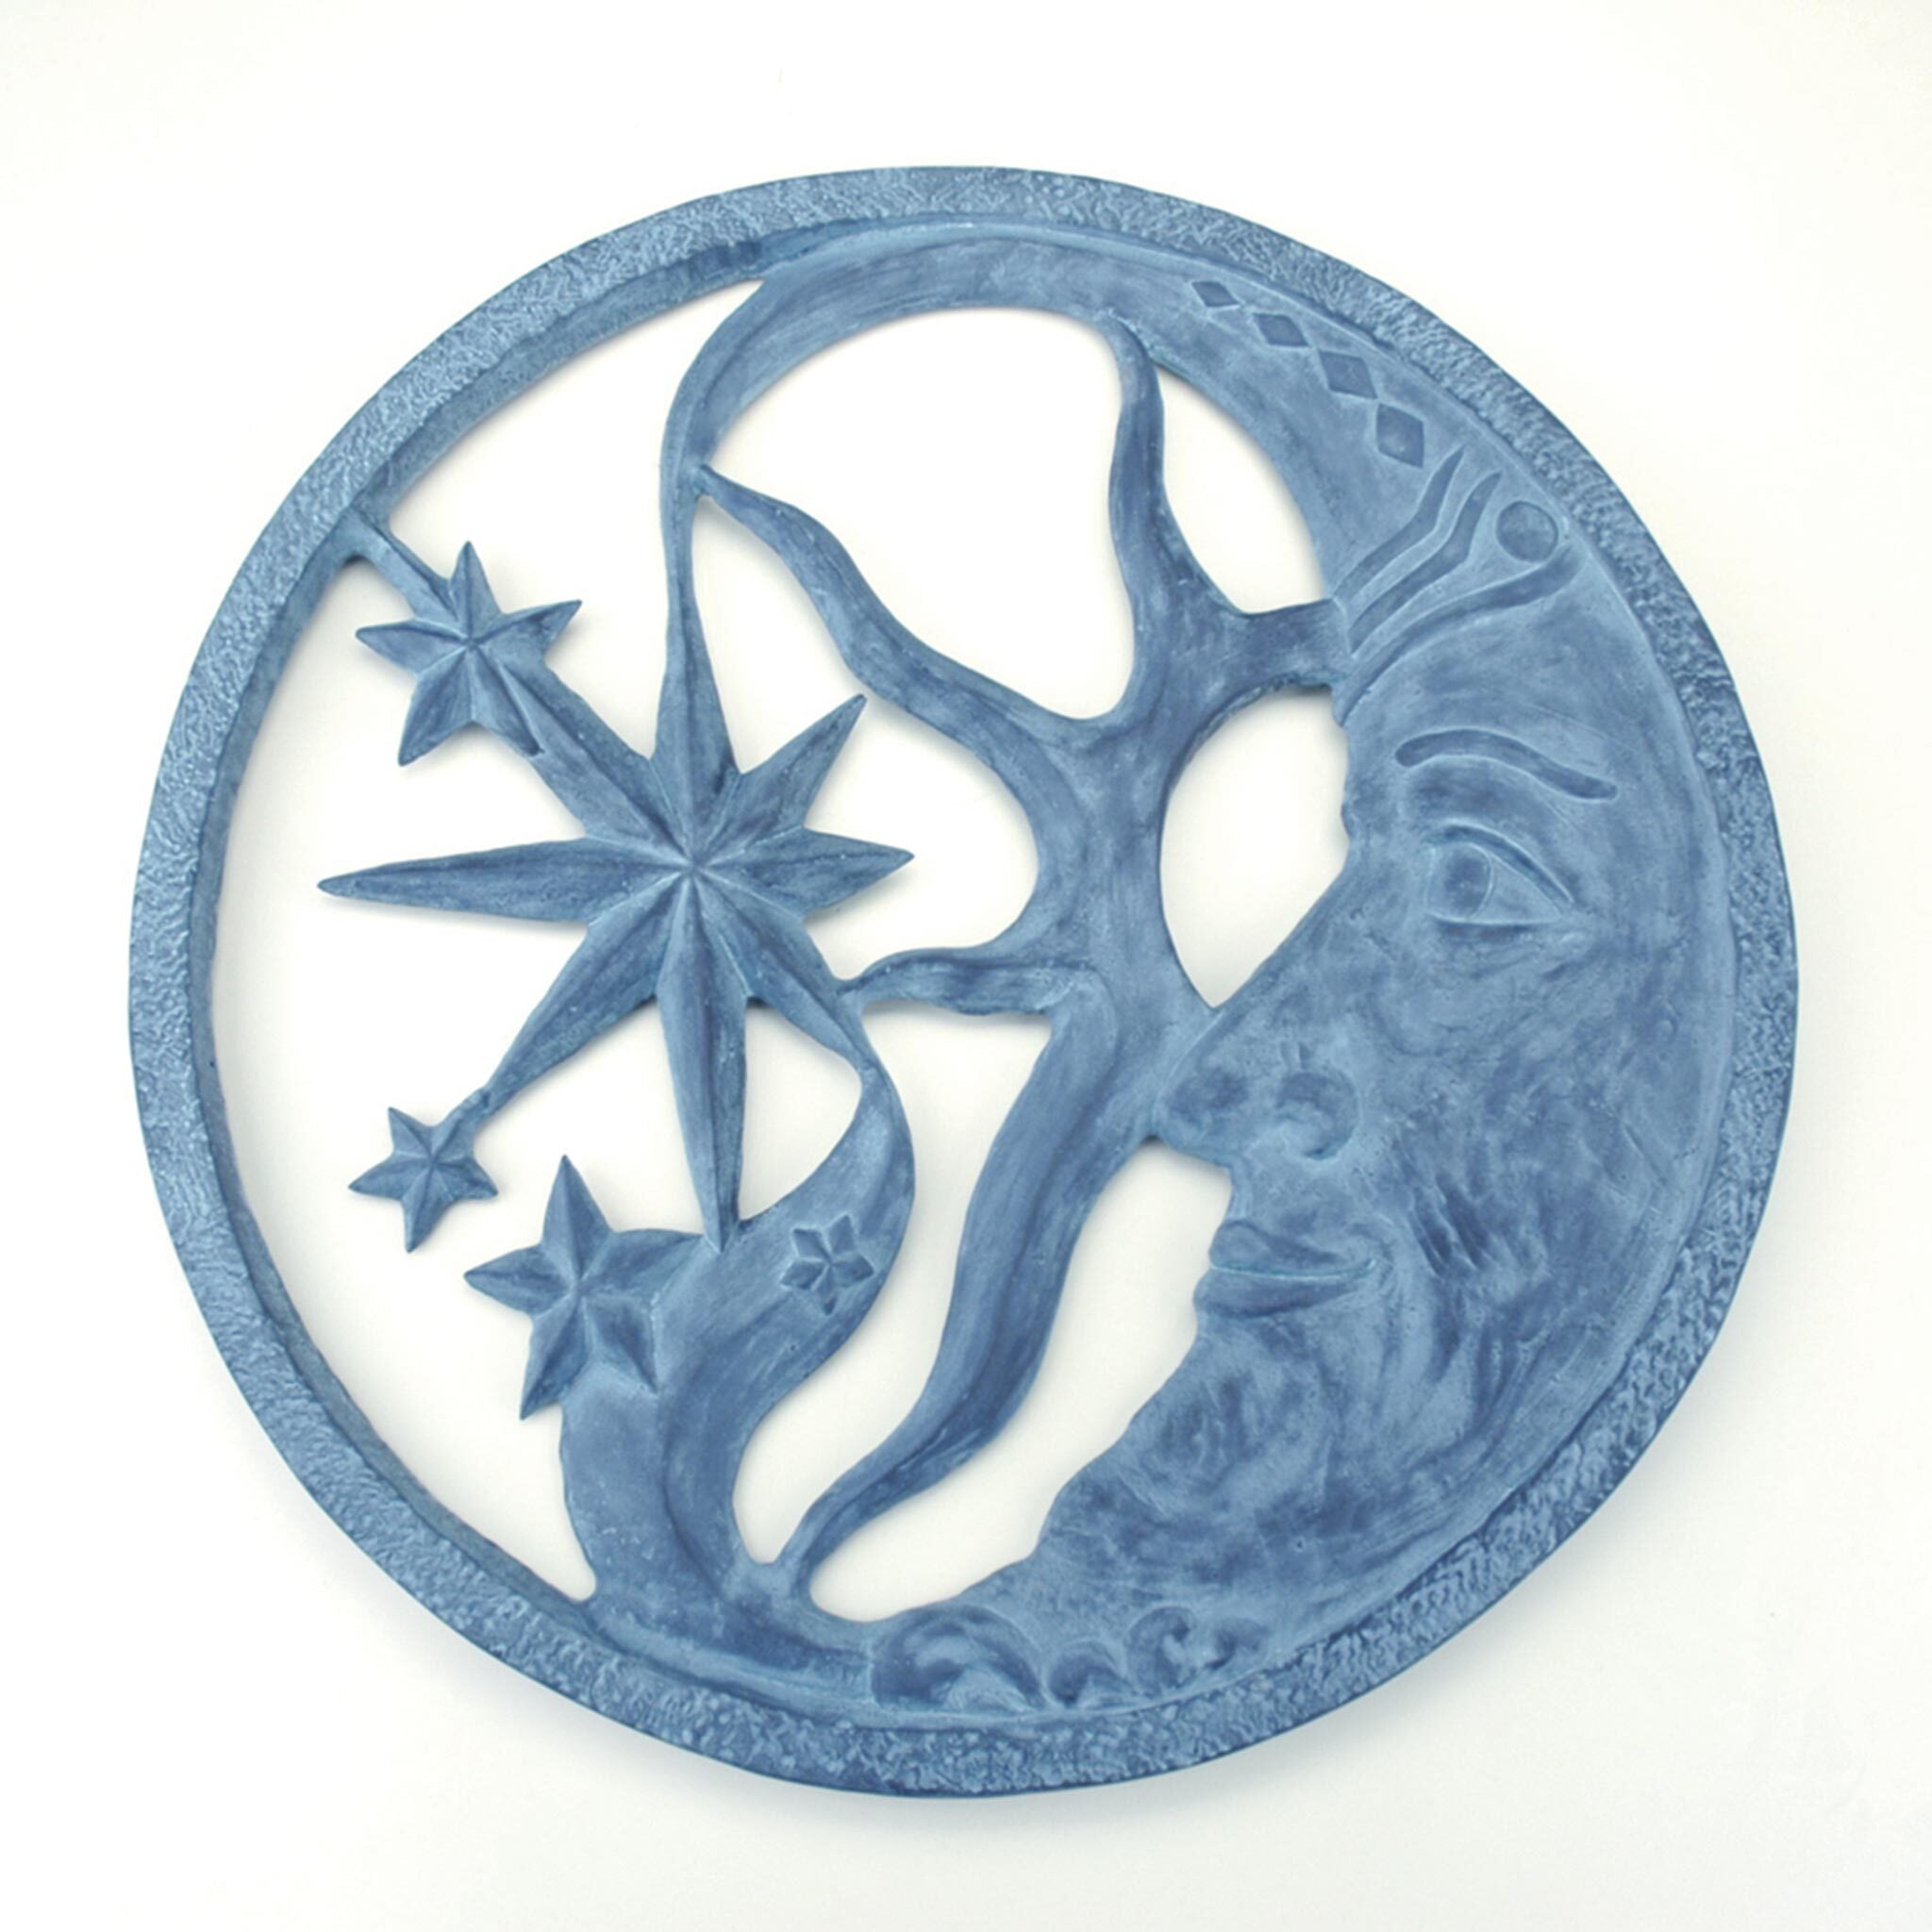 SPI Home Home Moon and Star Wall Plaque